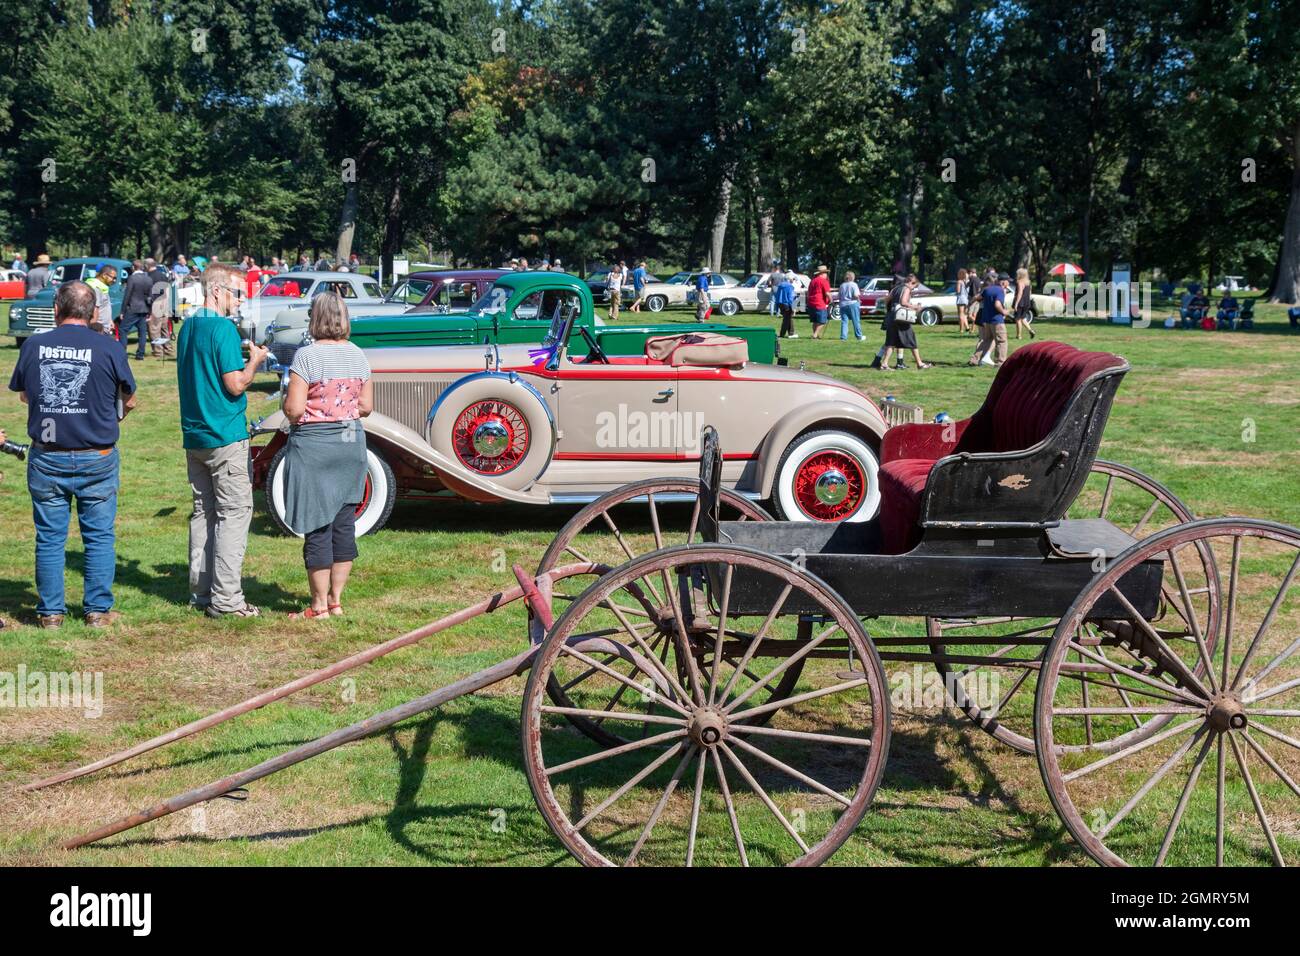 Grosse Pointe Shores, Michigan - A 1902 Studebaker Doctors Buggy was among Studebaker vehicles at the Eyes on Design auto show. This year's show featu Stock Photo